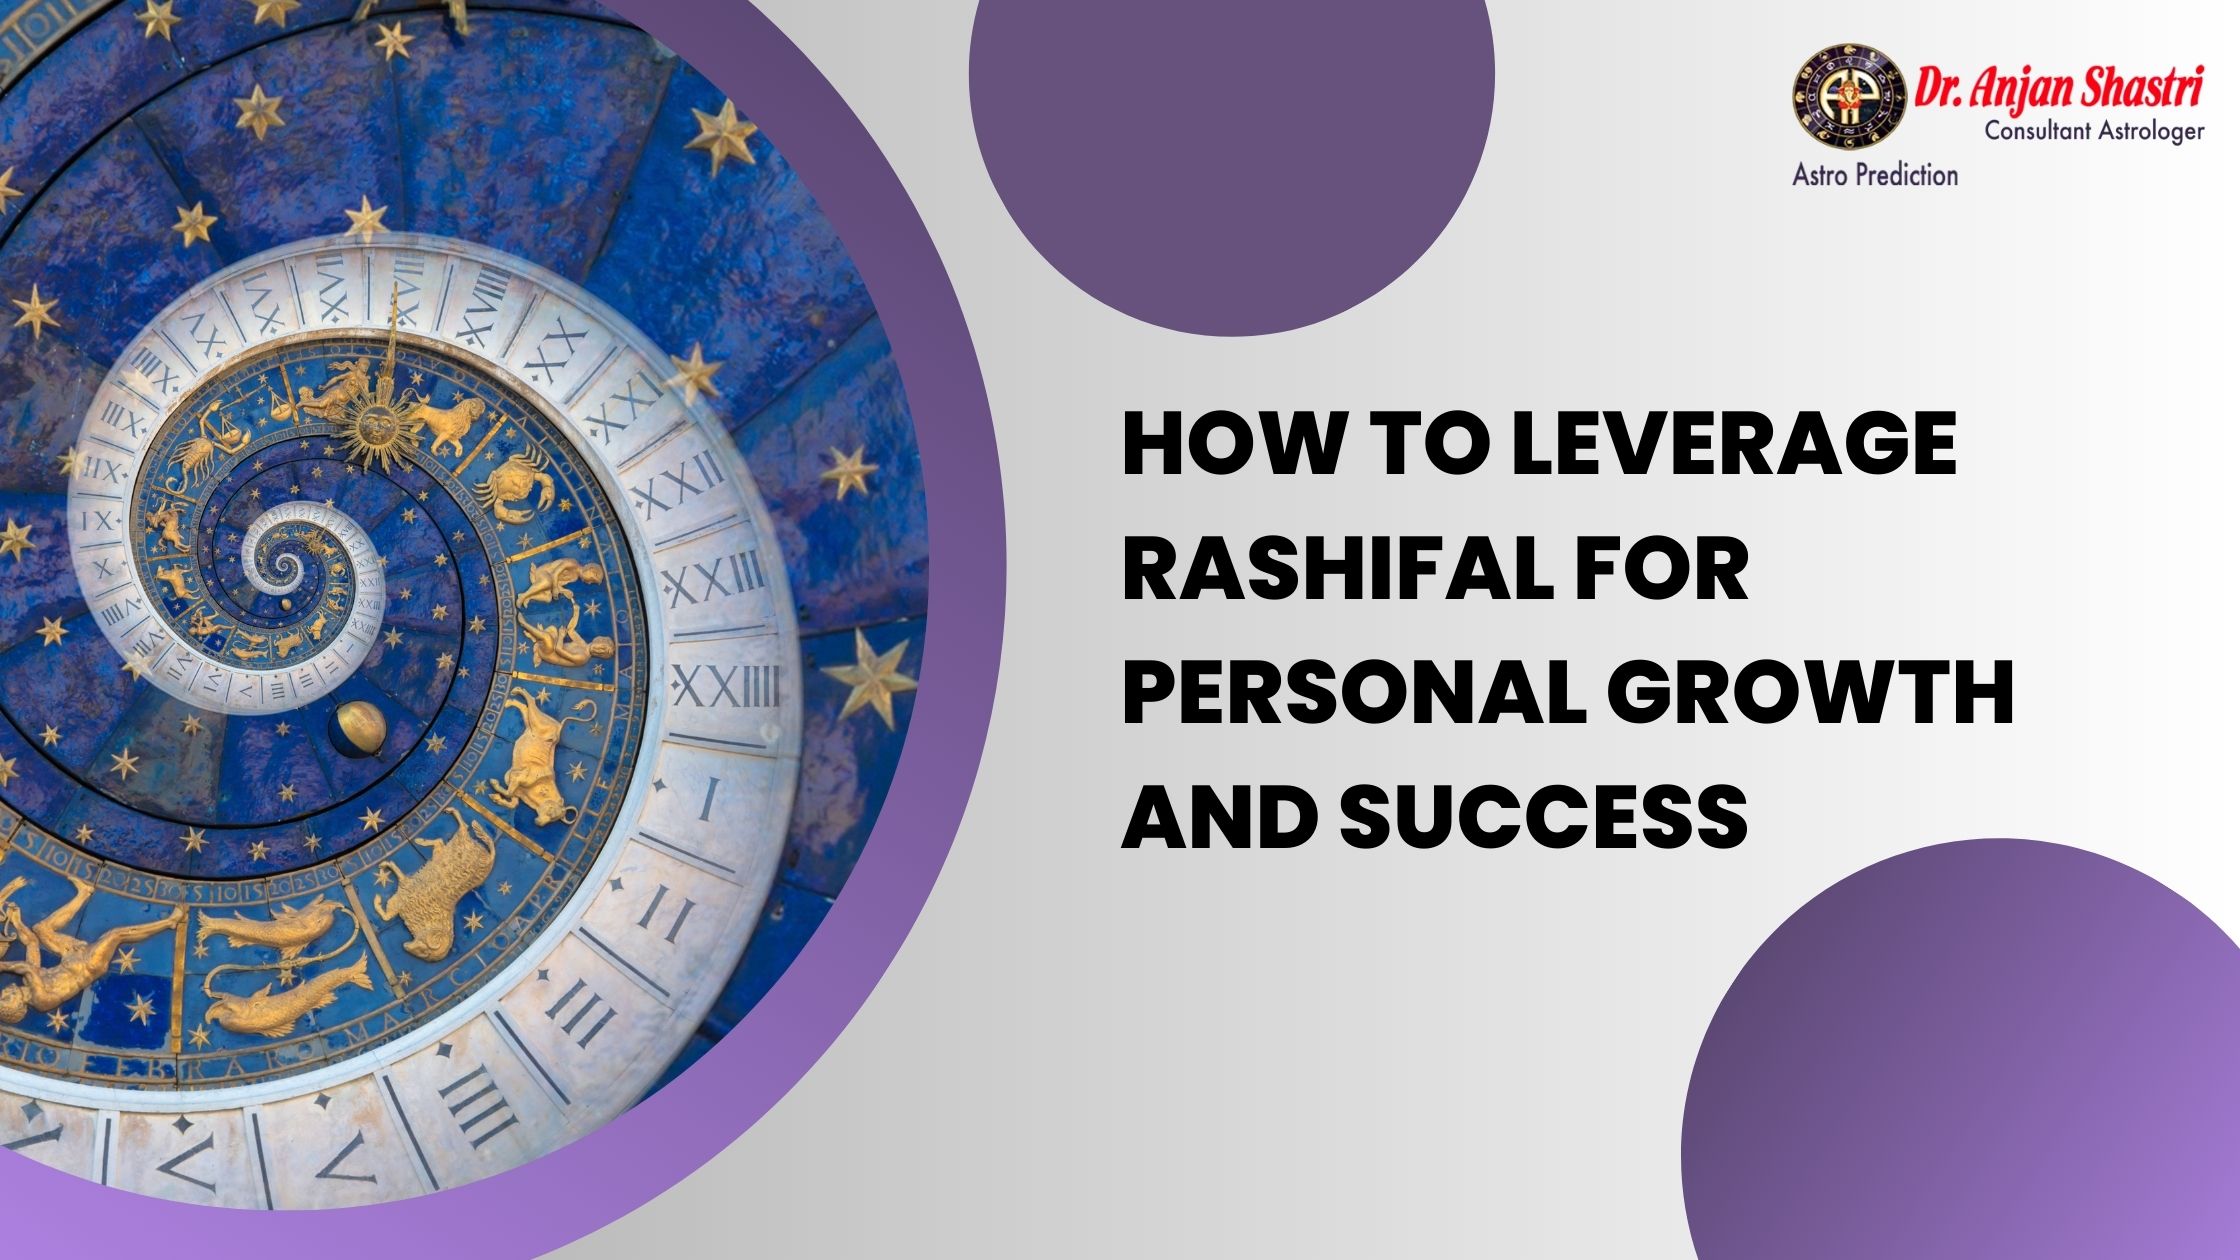 How to Leverage Rashifal for Personal Growth and Success